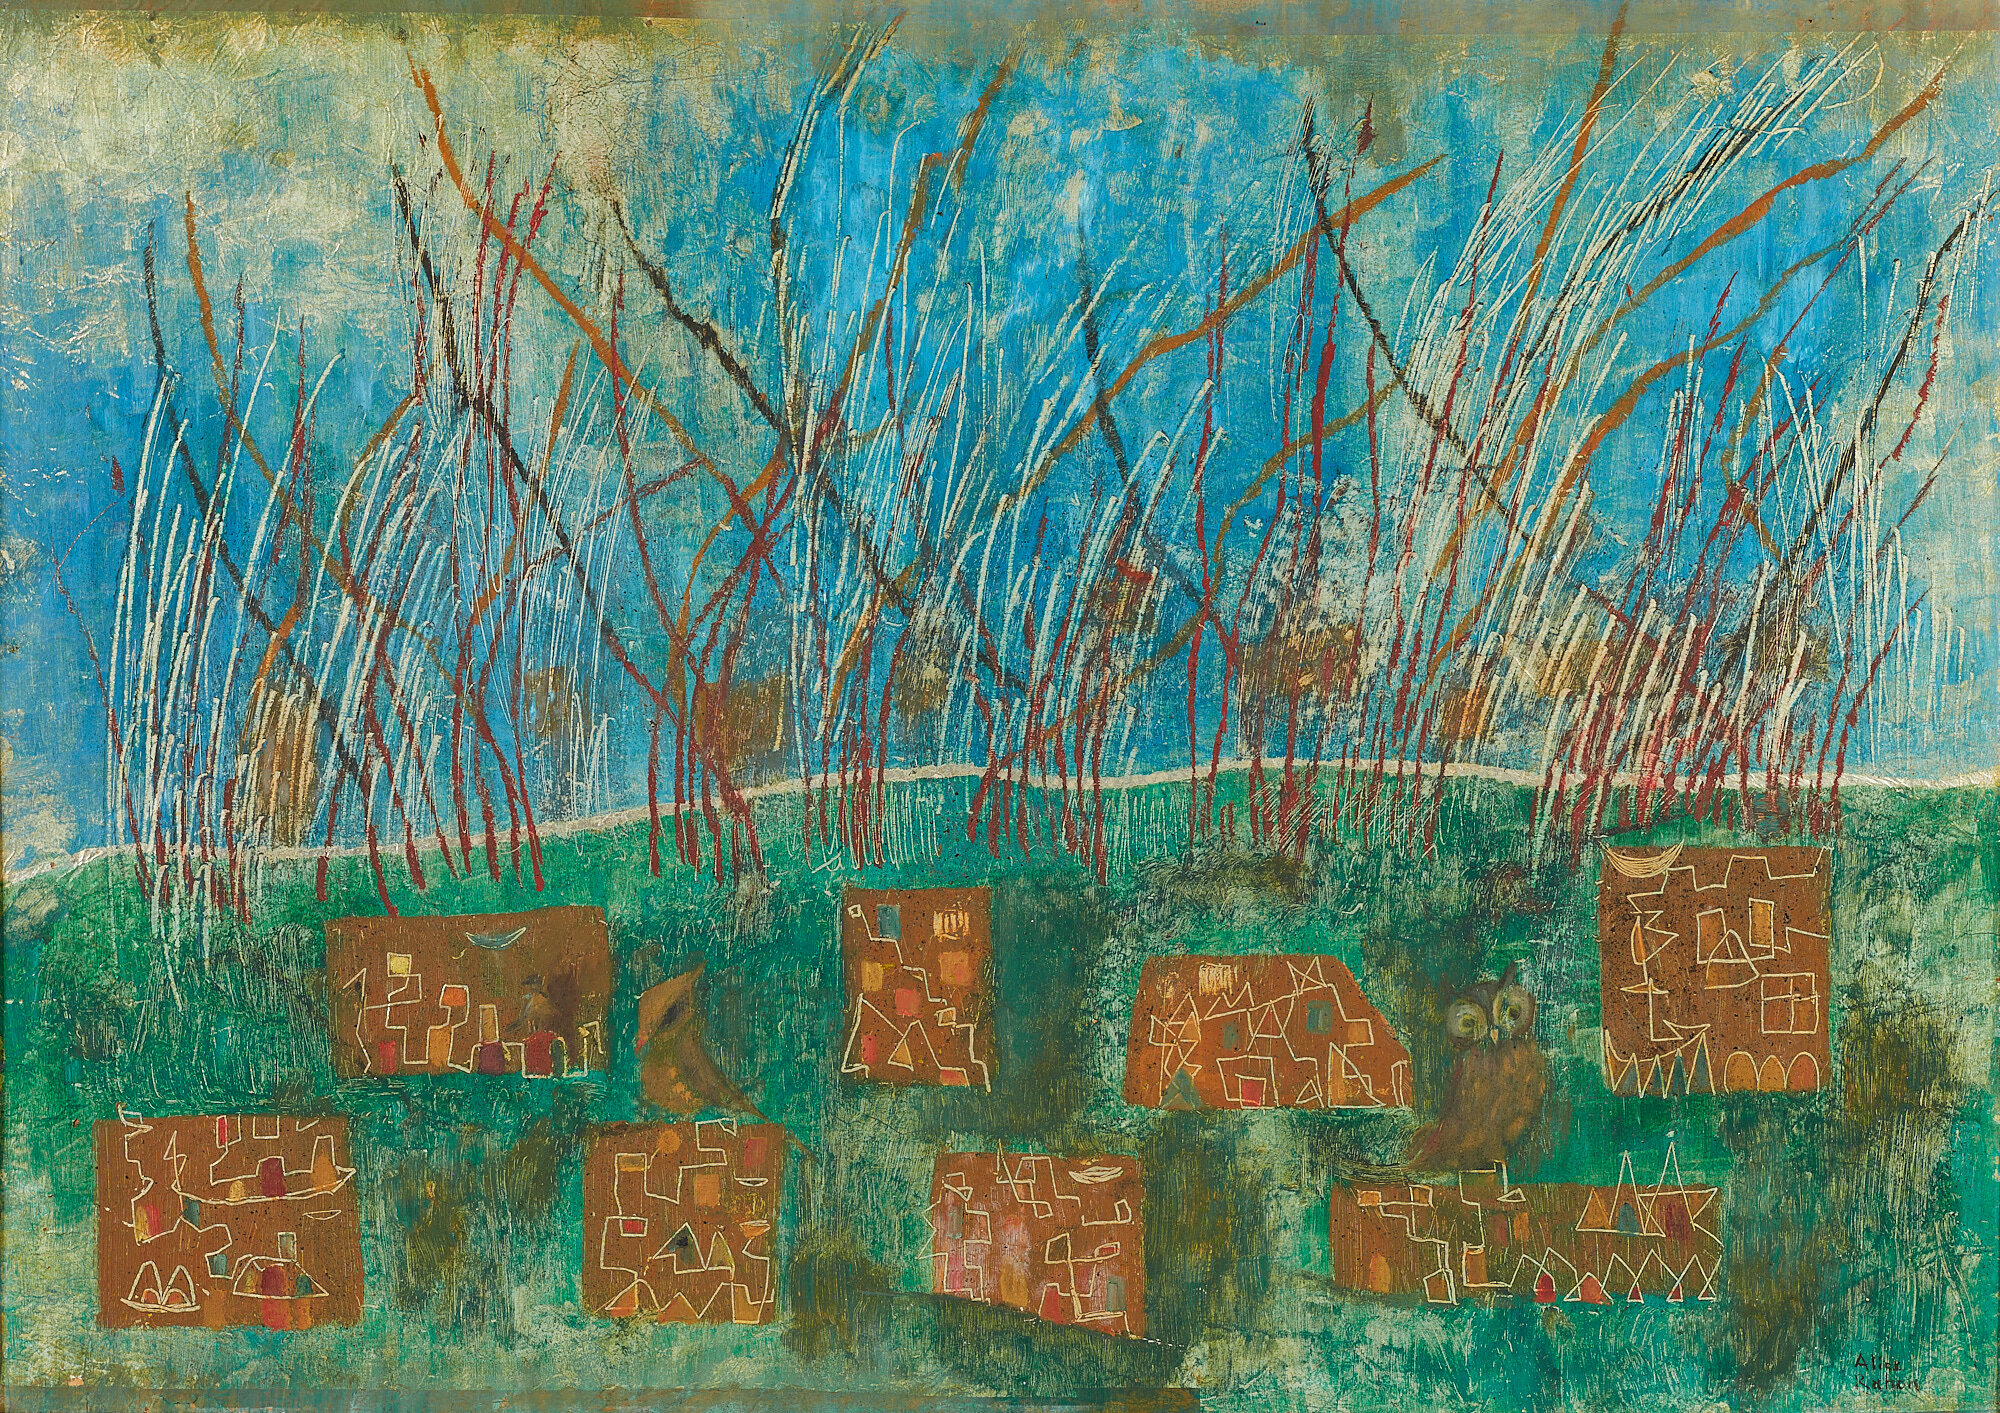  Alice Rahon,  Los guardianes , 1959, oil on metallic paper on wood panel, 20 1/2 x 29 1/8 inches (52.1 x 74 cm) 